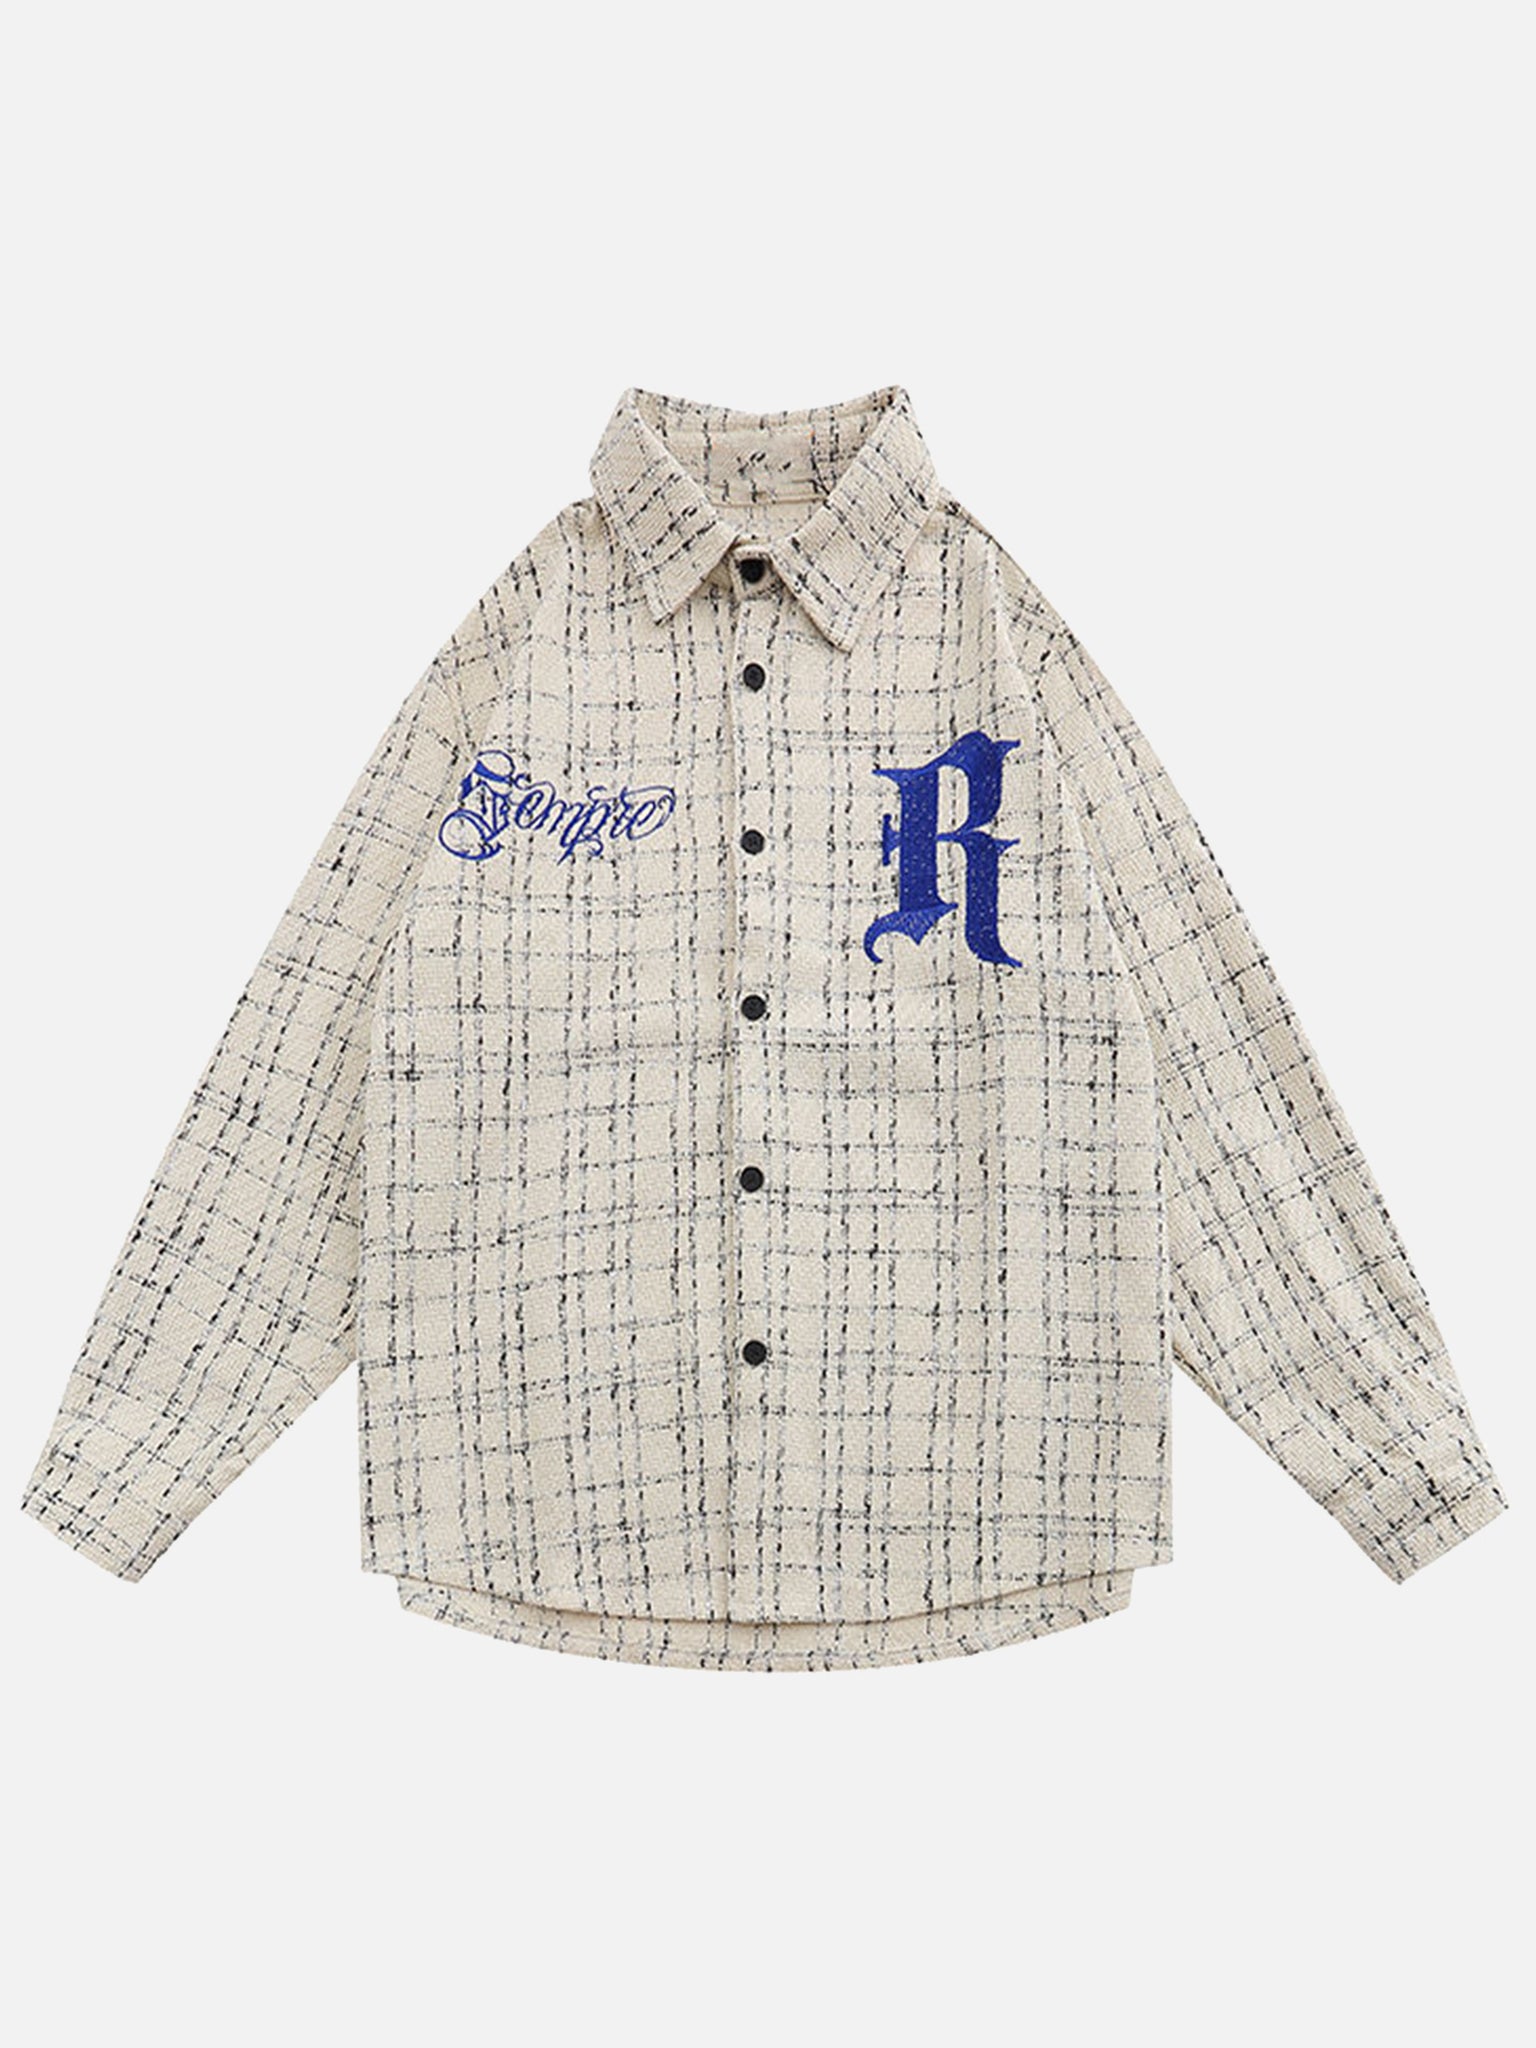 The Supermade Embroidered Plaid Shirt Jacket